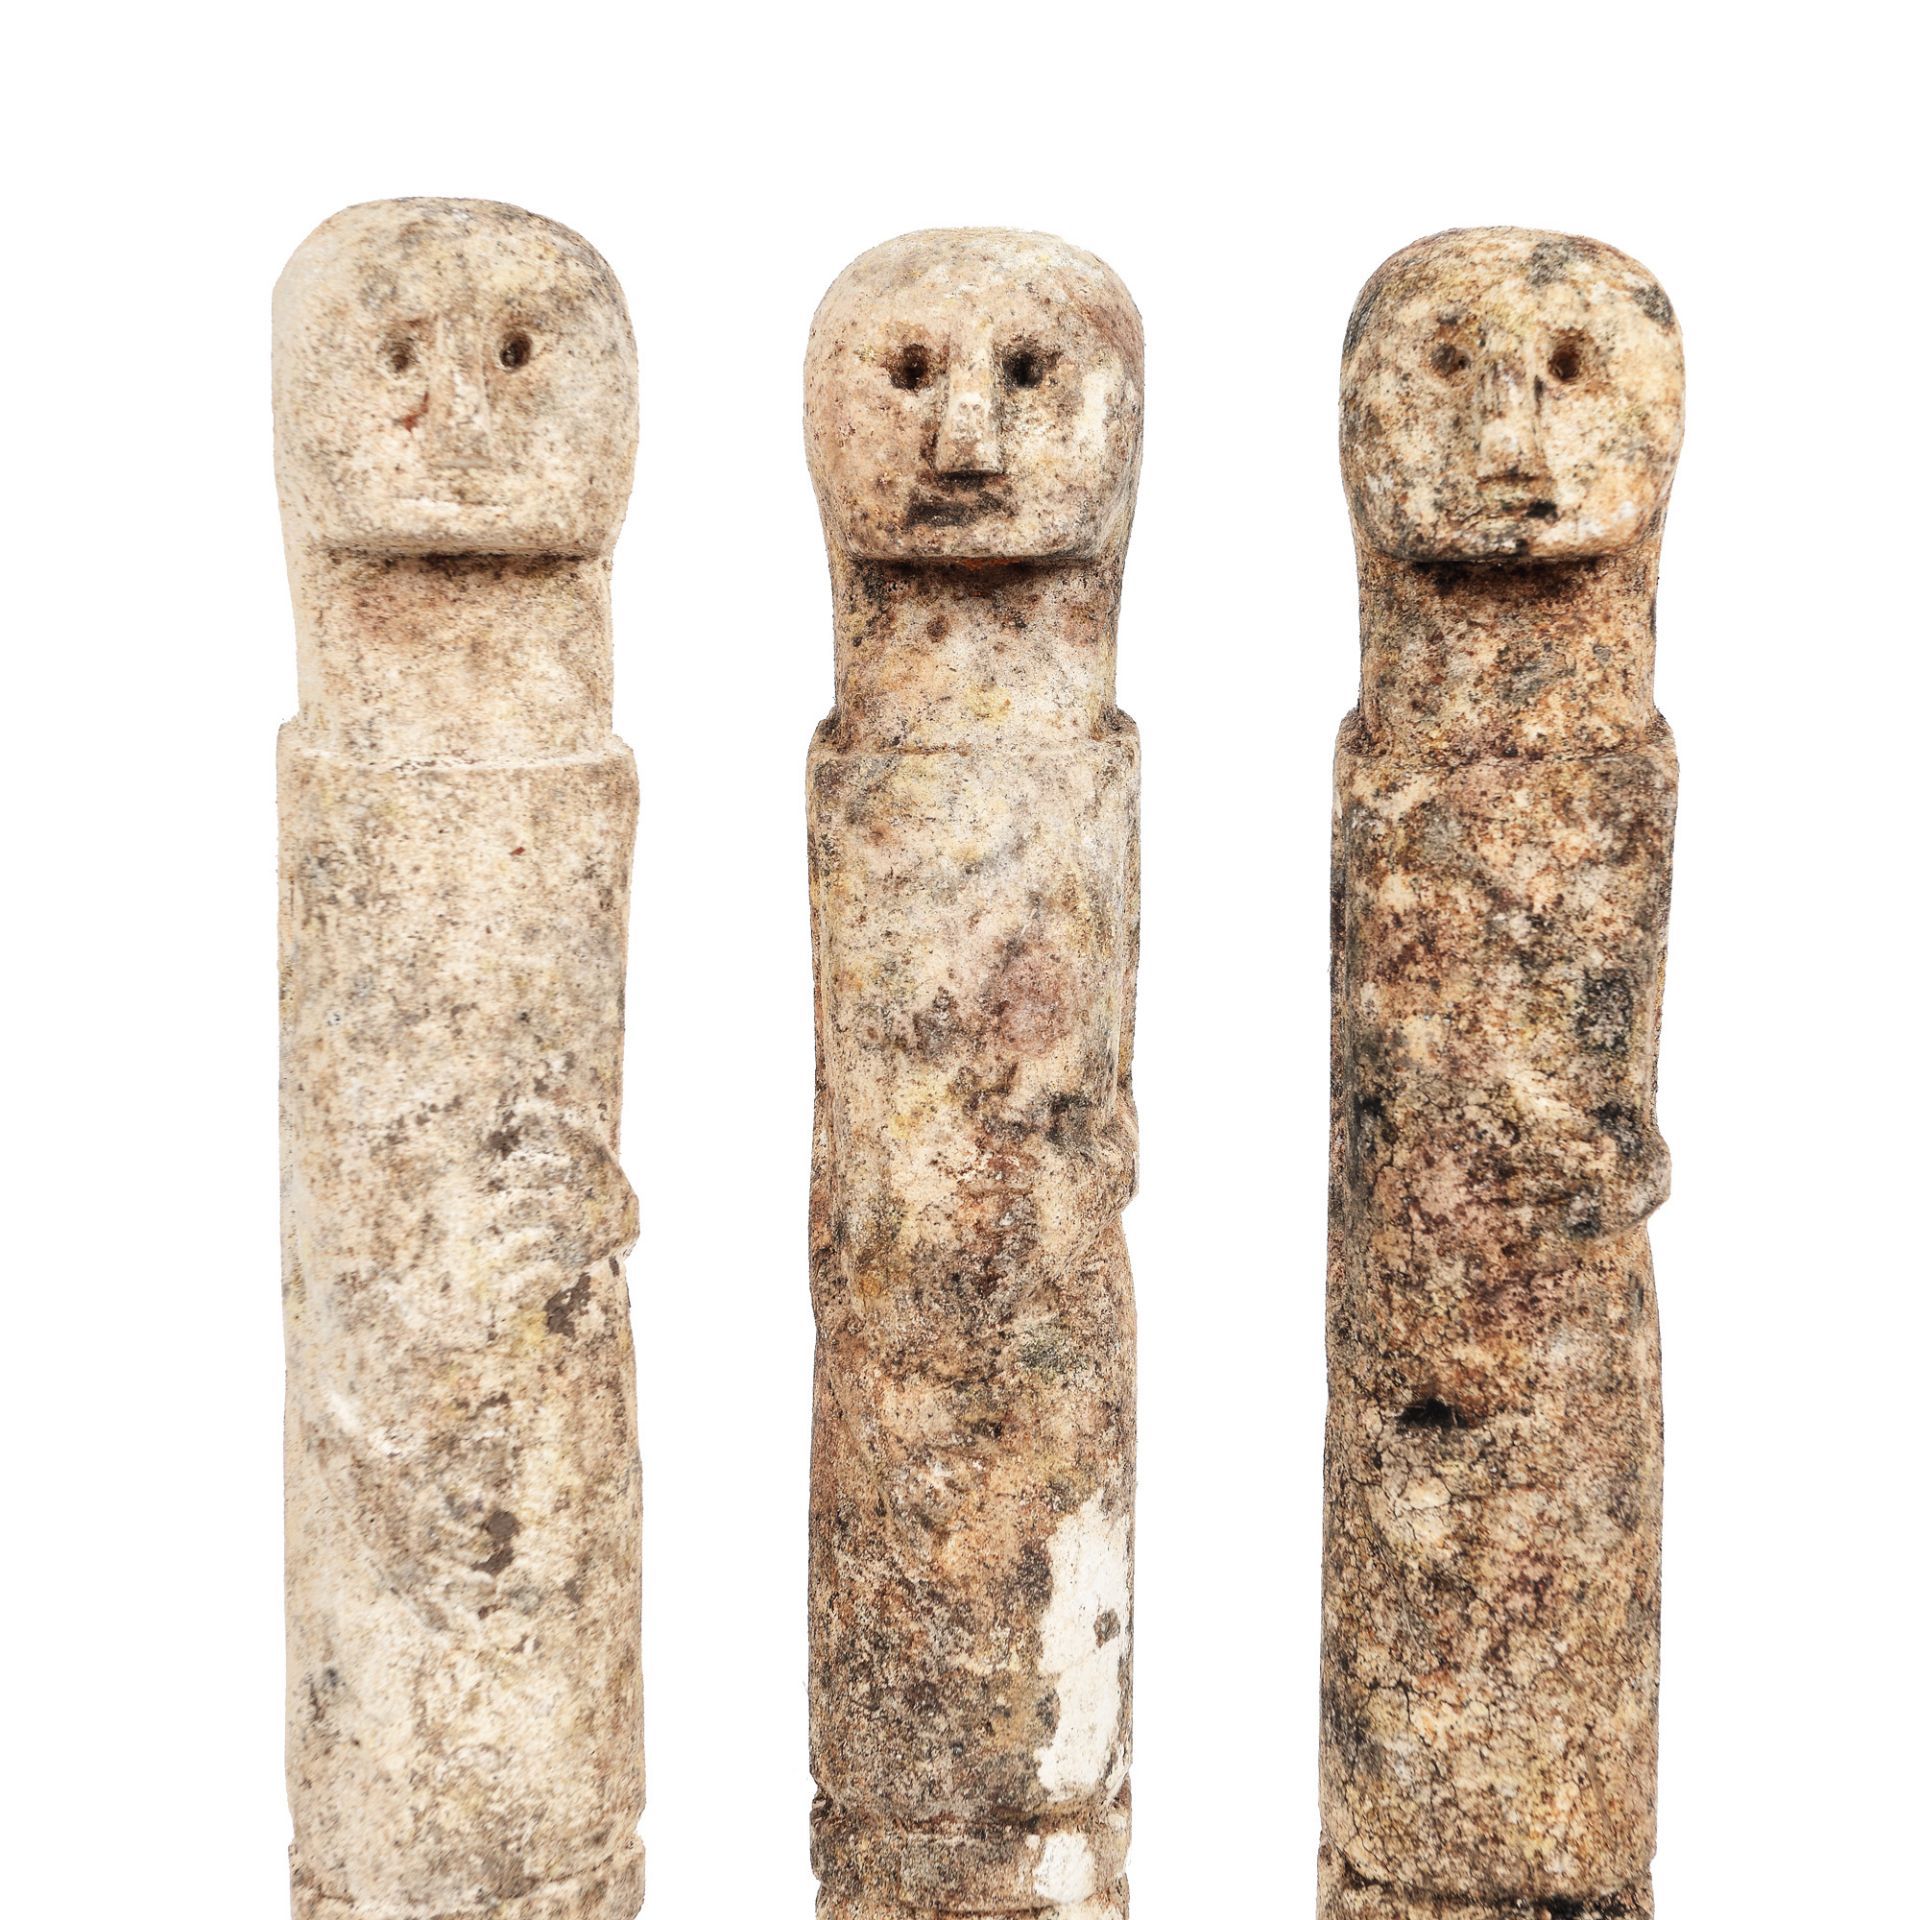 Three stone statuettes, possibly Timor, Indonesia - Image 3 of 3